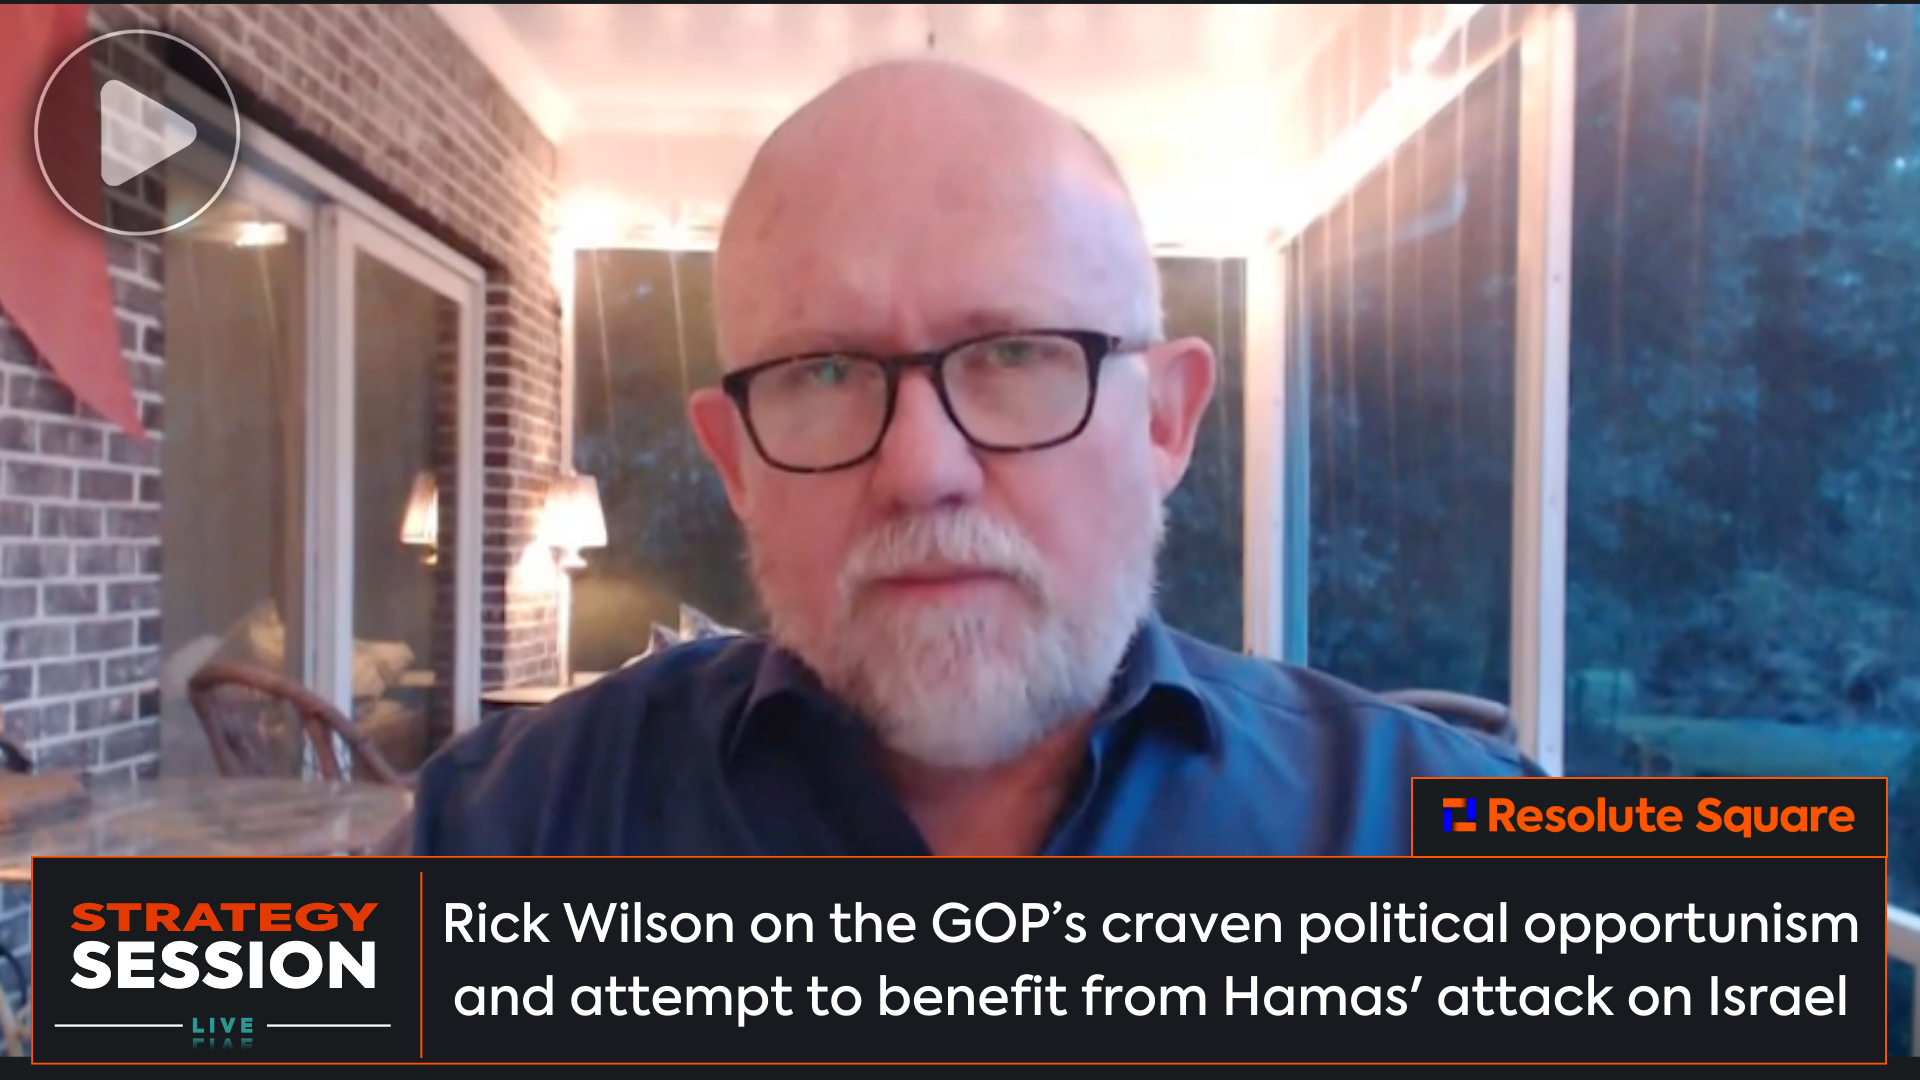 The GOP Sees Hamas Attack As A Political Opportunity